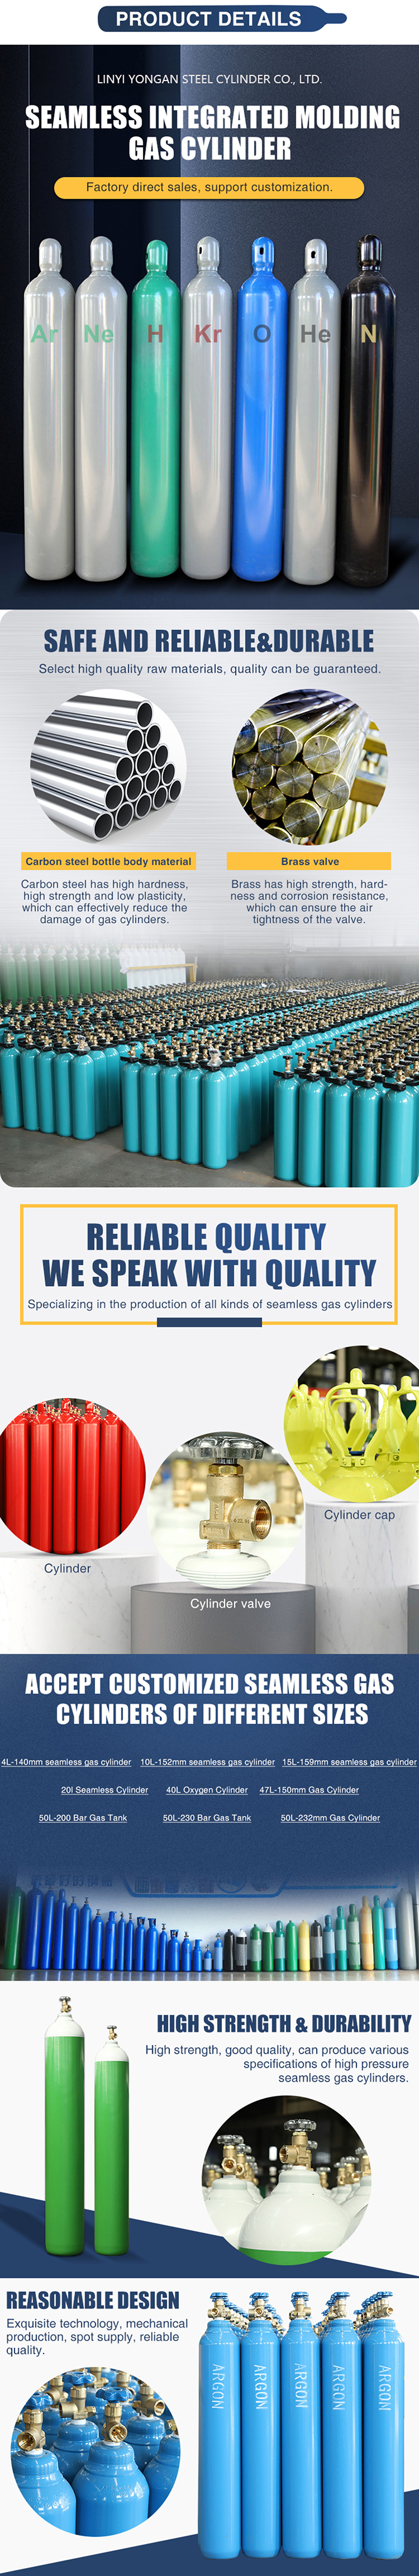 High Pressure Vessel Seamless Steel Gas Cylinde rwith TUV Test Report 40L 230bar  Gas Cylinder